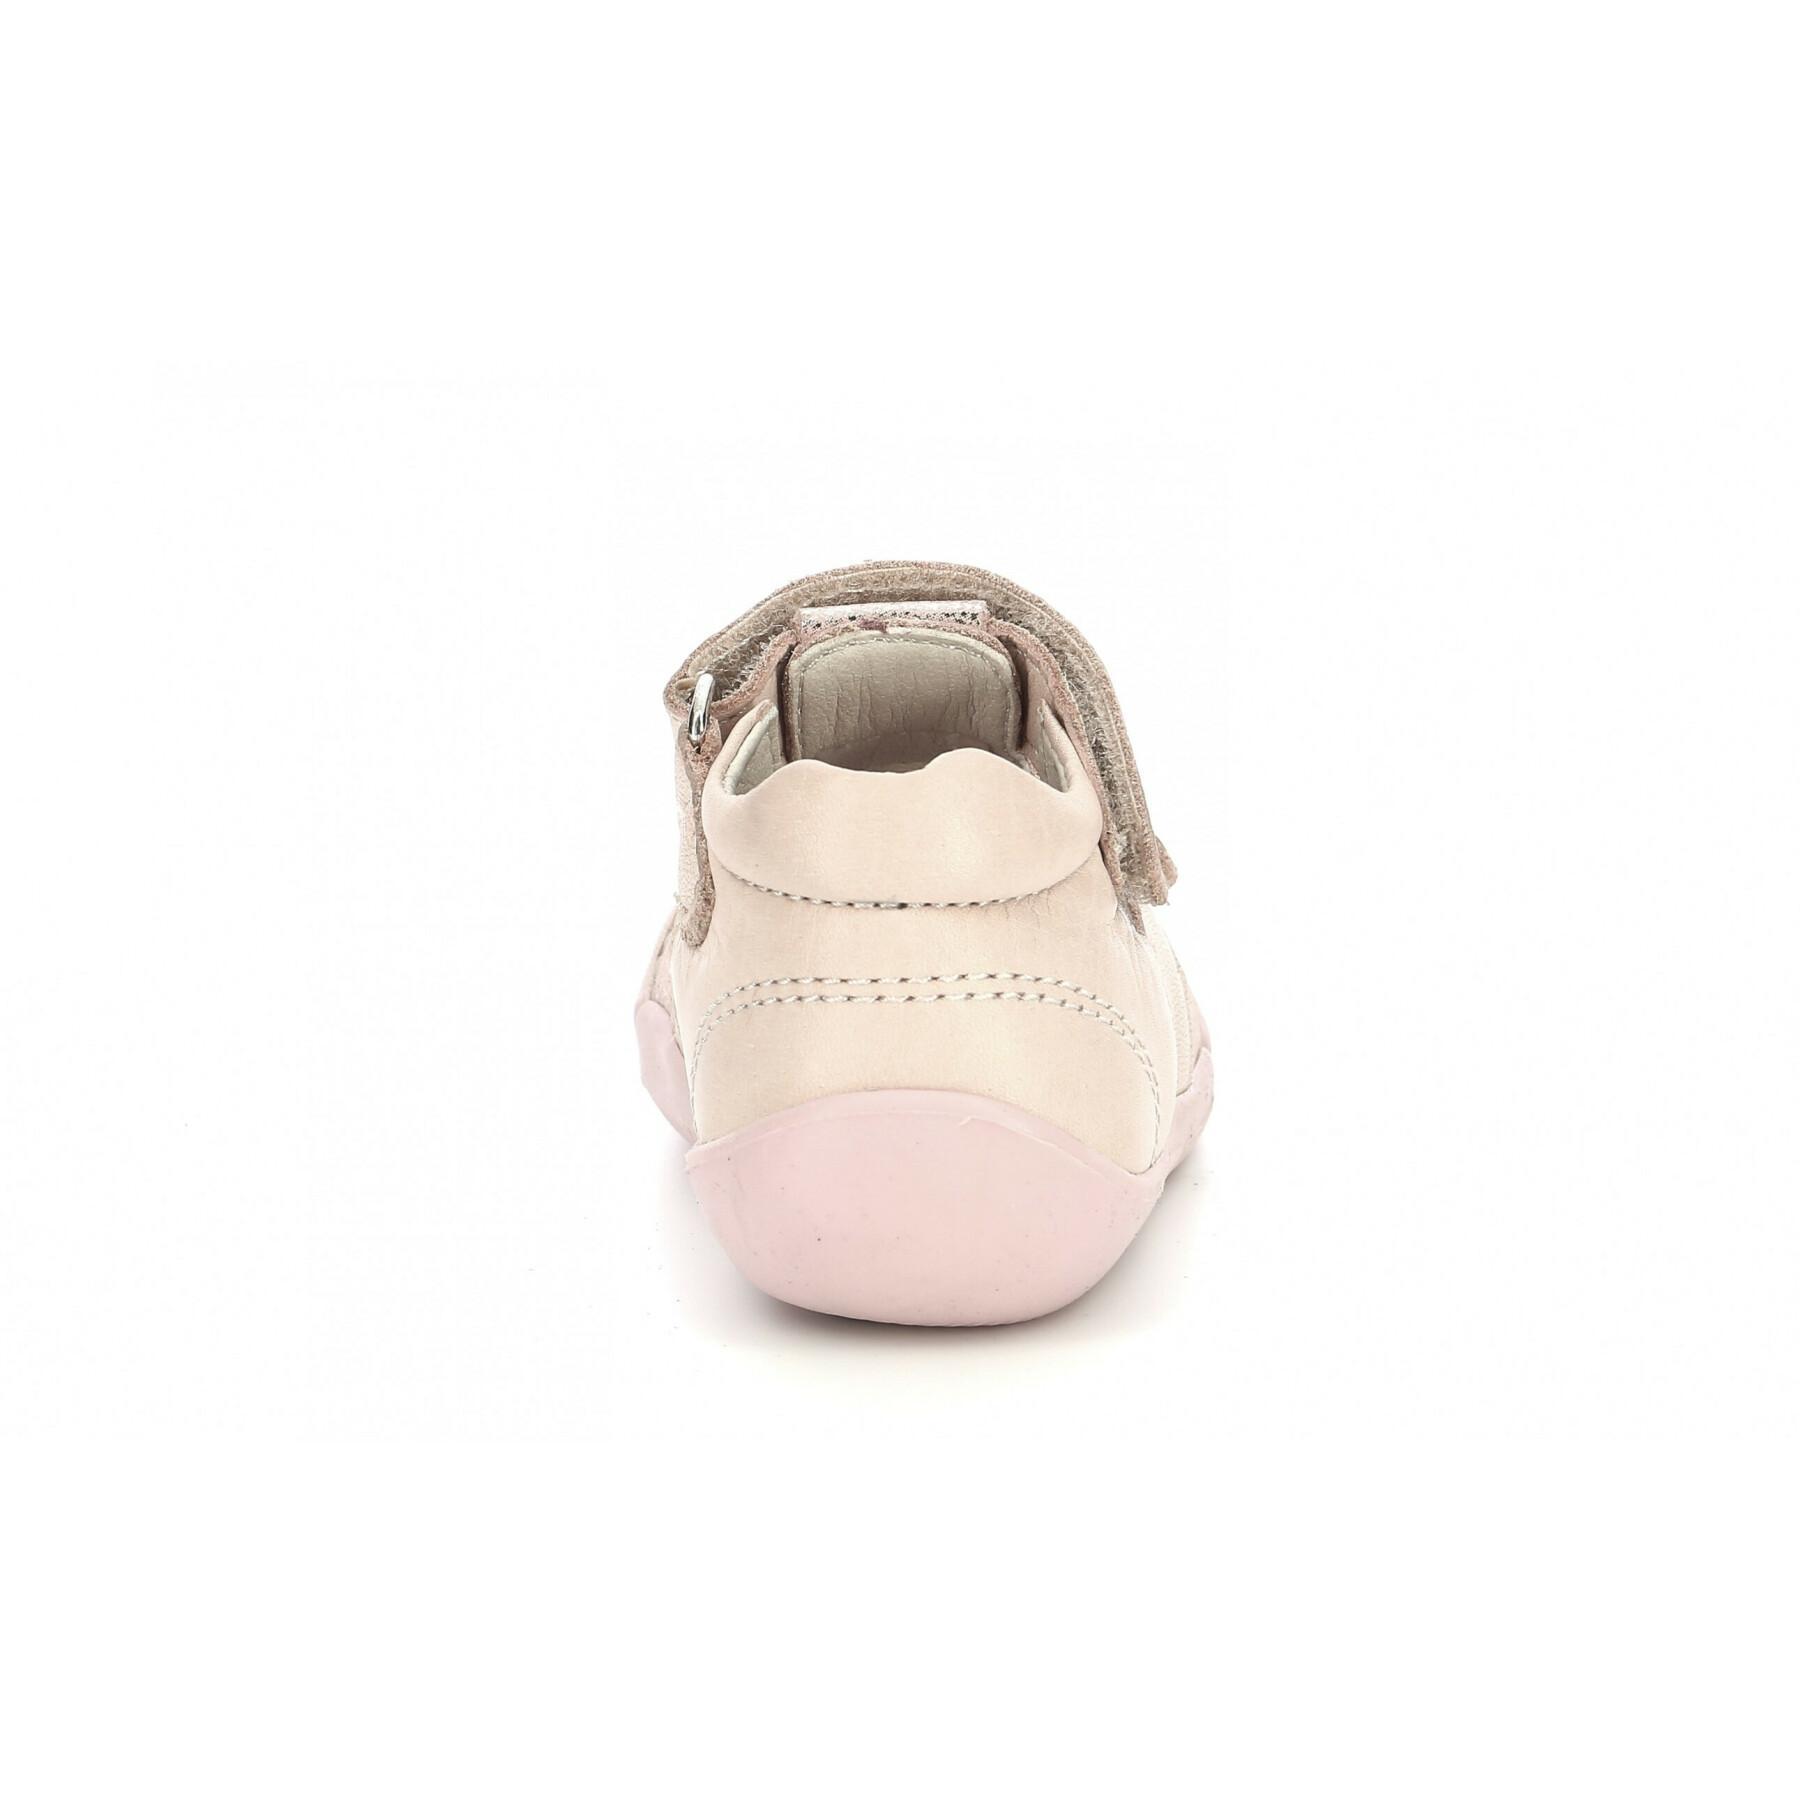 Baby sandals Kickers Wasabou